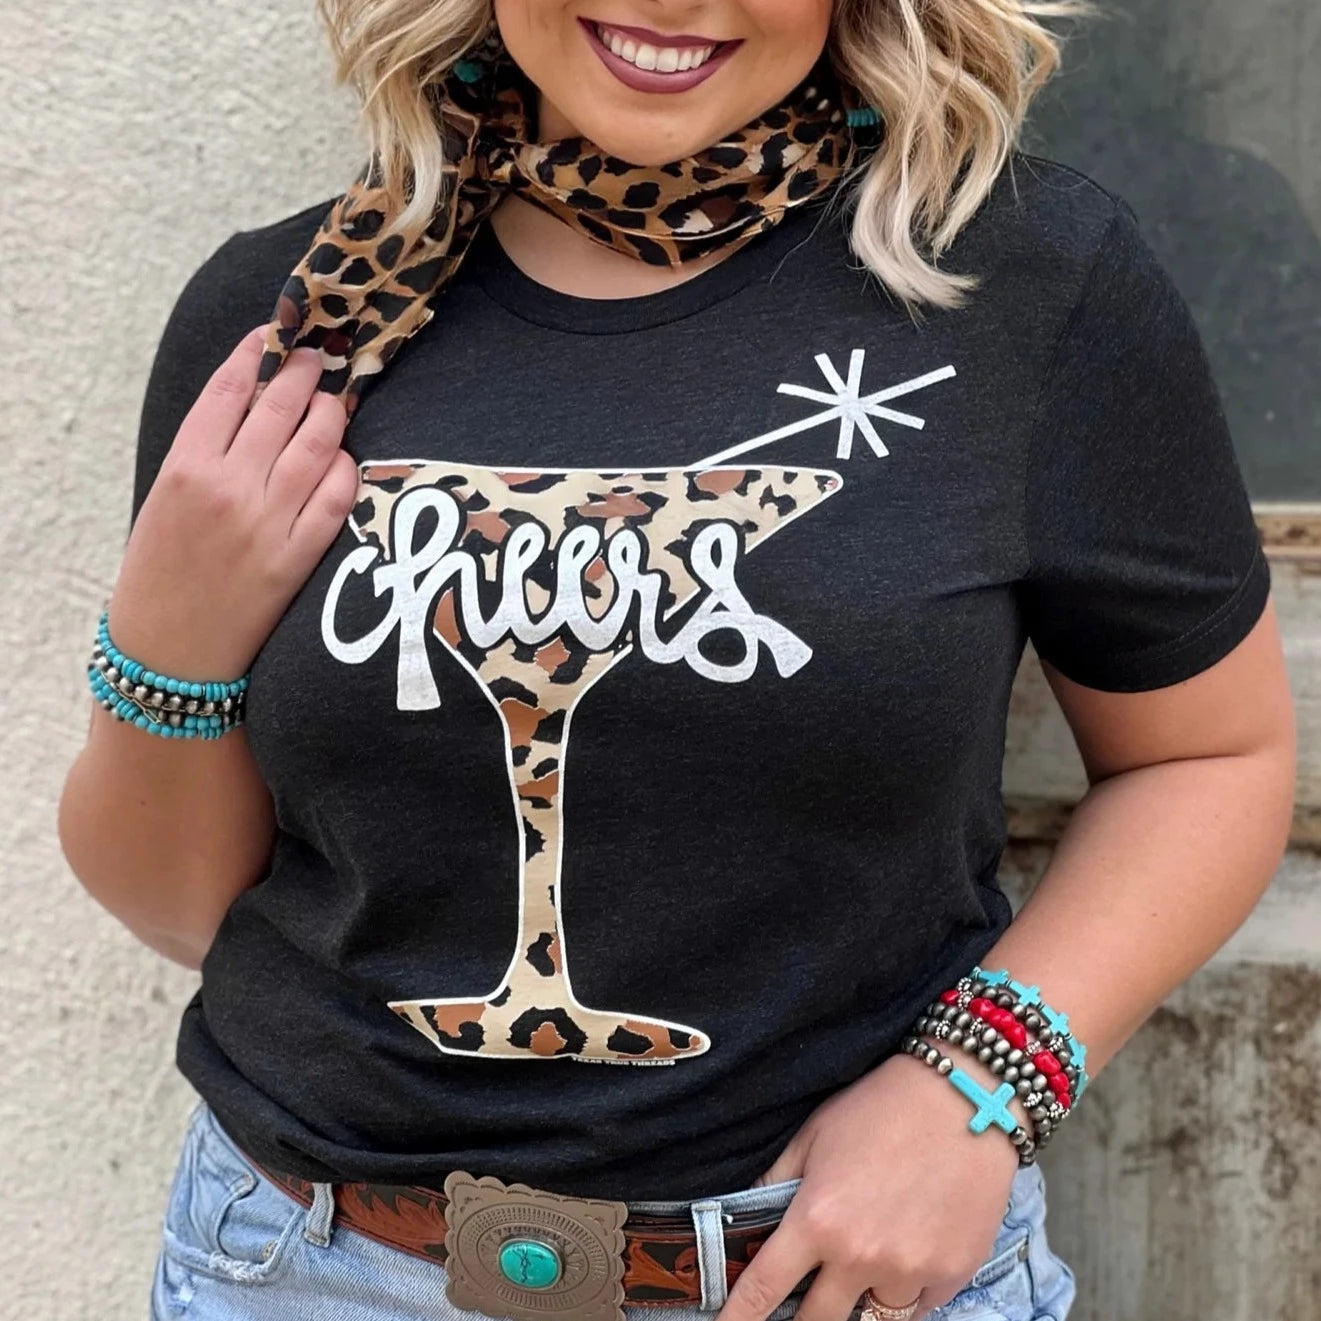 Cheers with Leopard Print V-NECK Tee